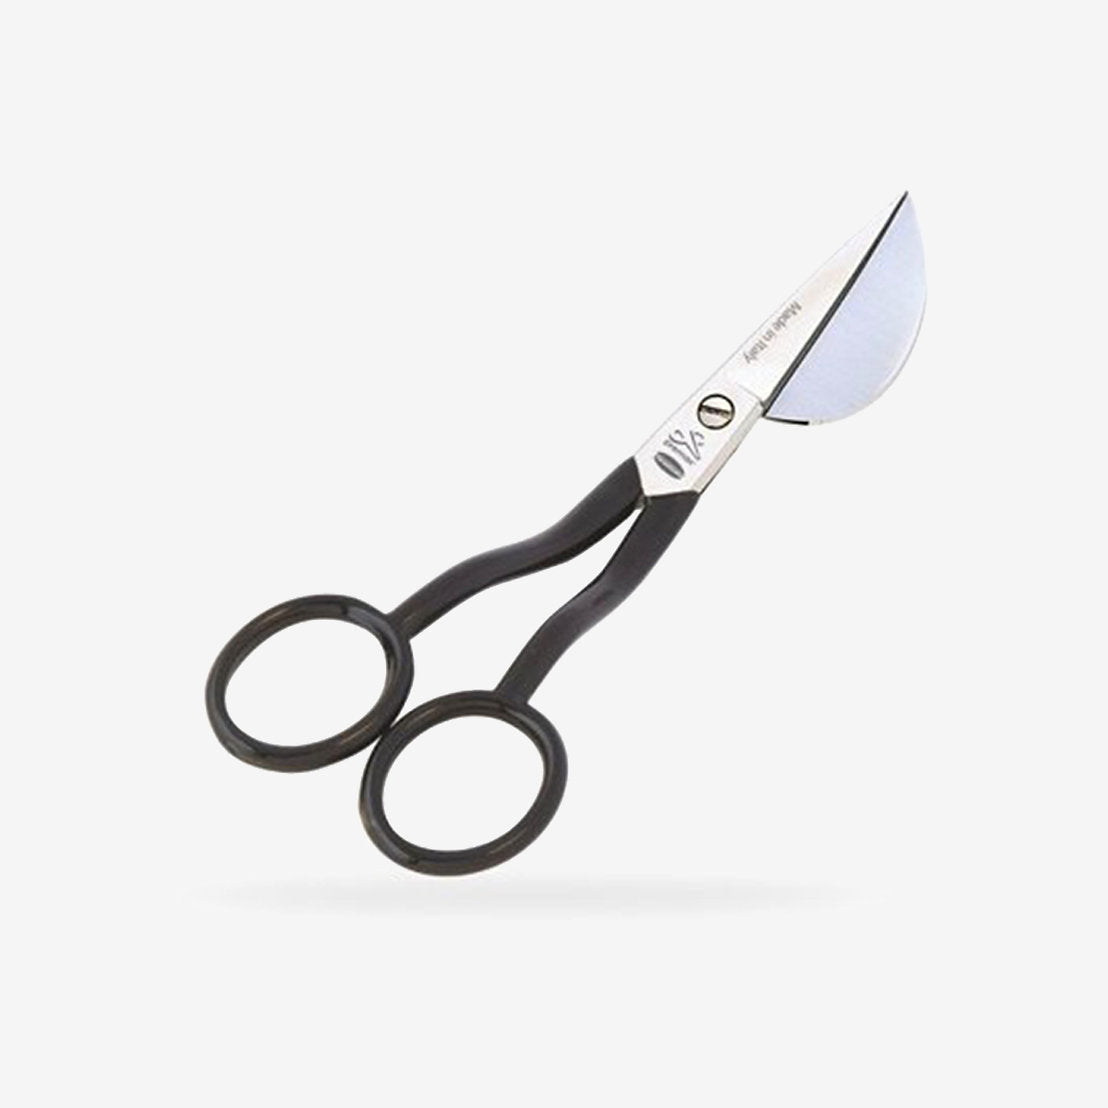 Premax 87021 Scissors for Appliques - Precision and Efficiency in your Application Projects